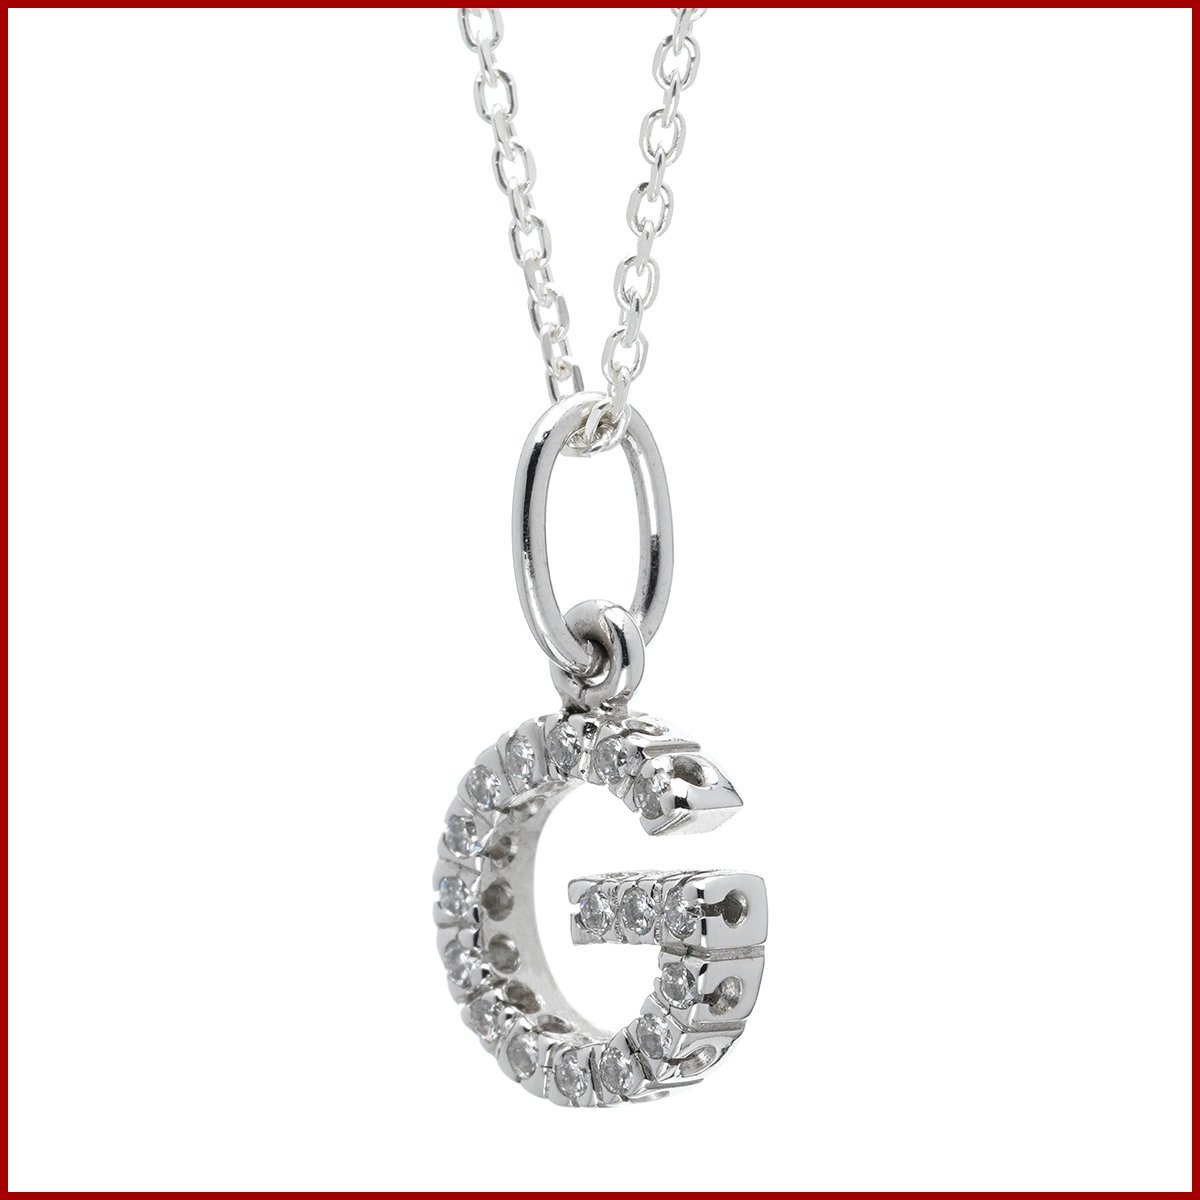  Gucci G motif diamond pendant necklace K18WG white gold beautiful goods new goods has been finished .. packet correspondence possibility postage 300 jpy 